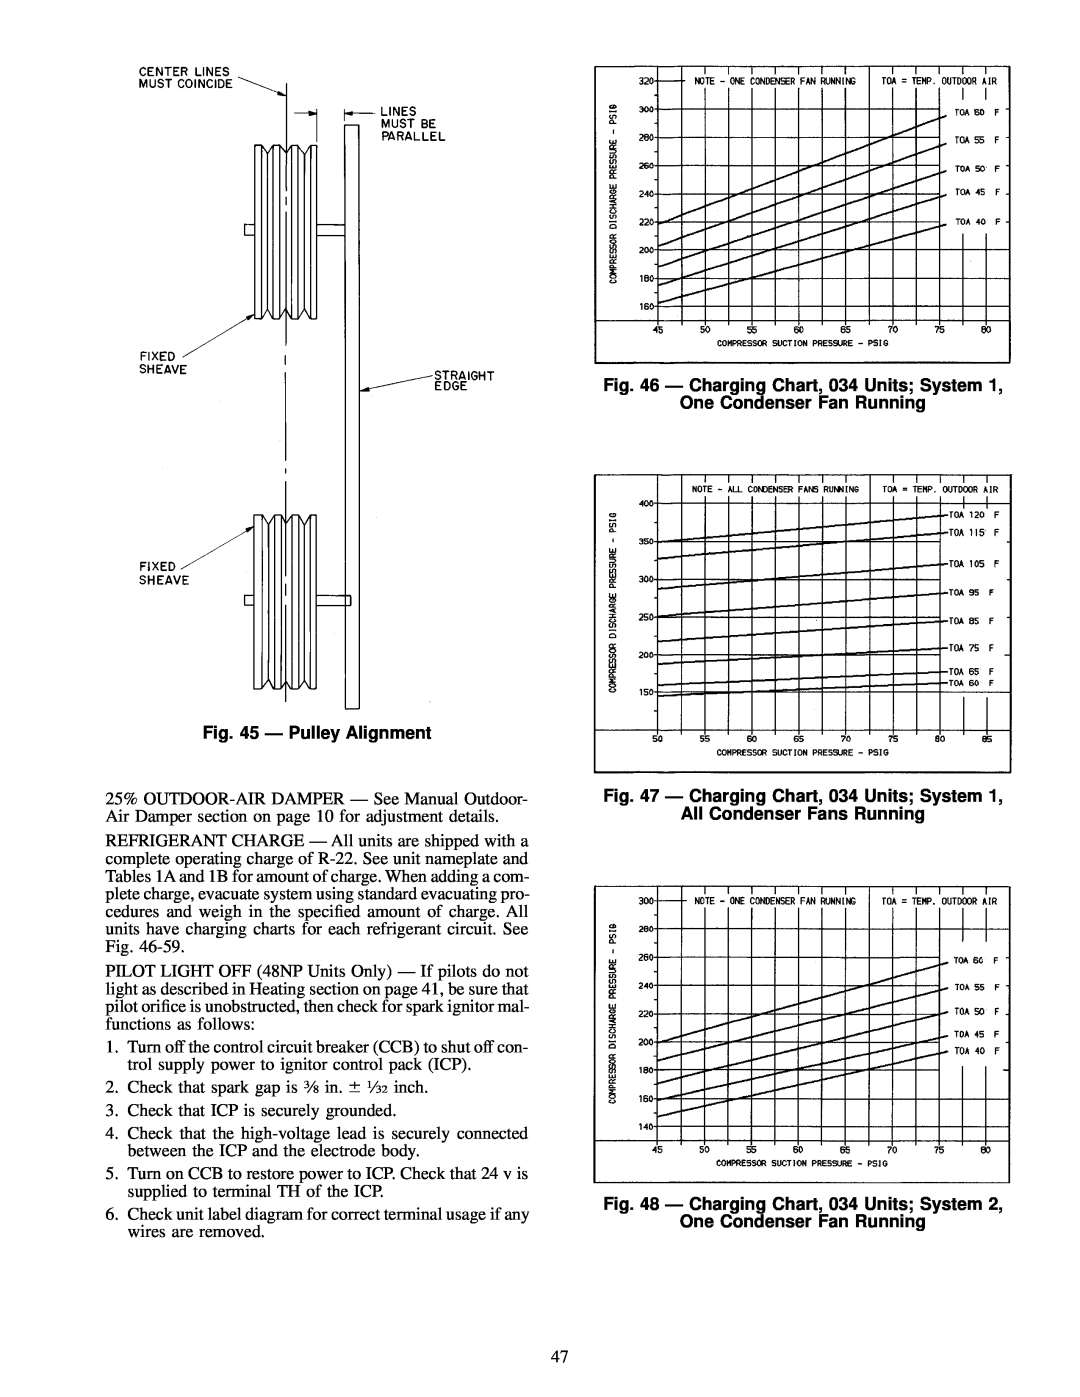 Carrier NP034-074 specifications Ð Pulley Alignment, Ð Charging Chart, 034 Units; System, One Condenser Fan Running 